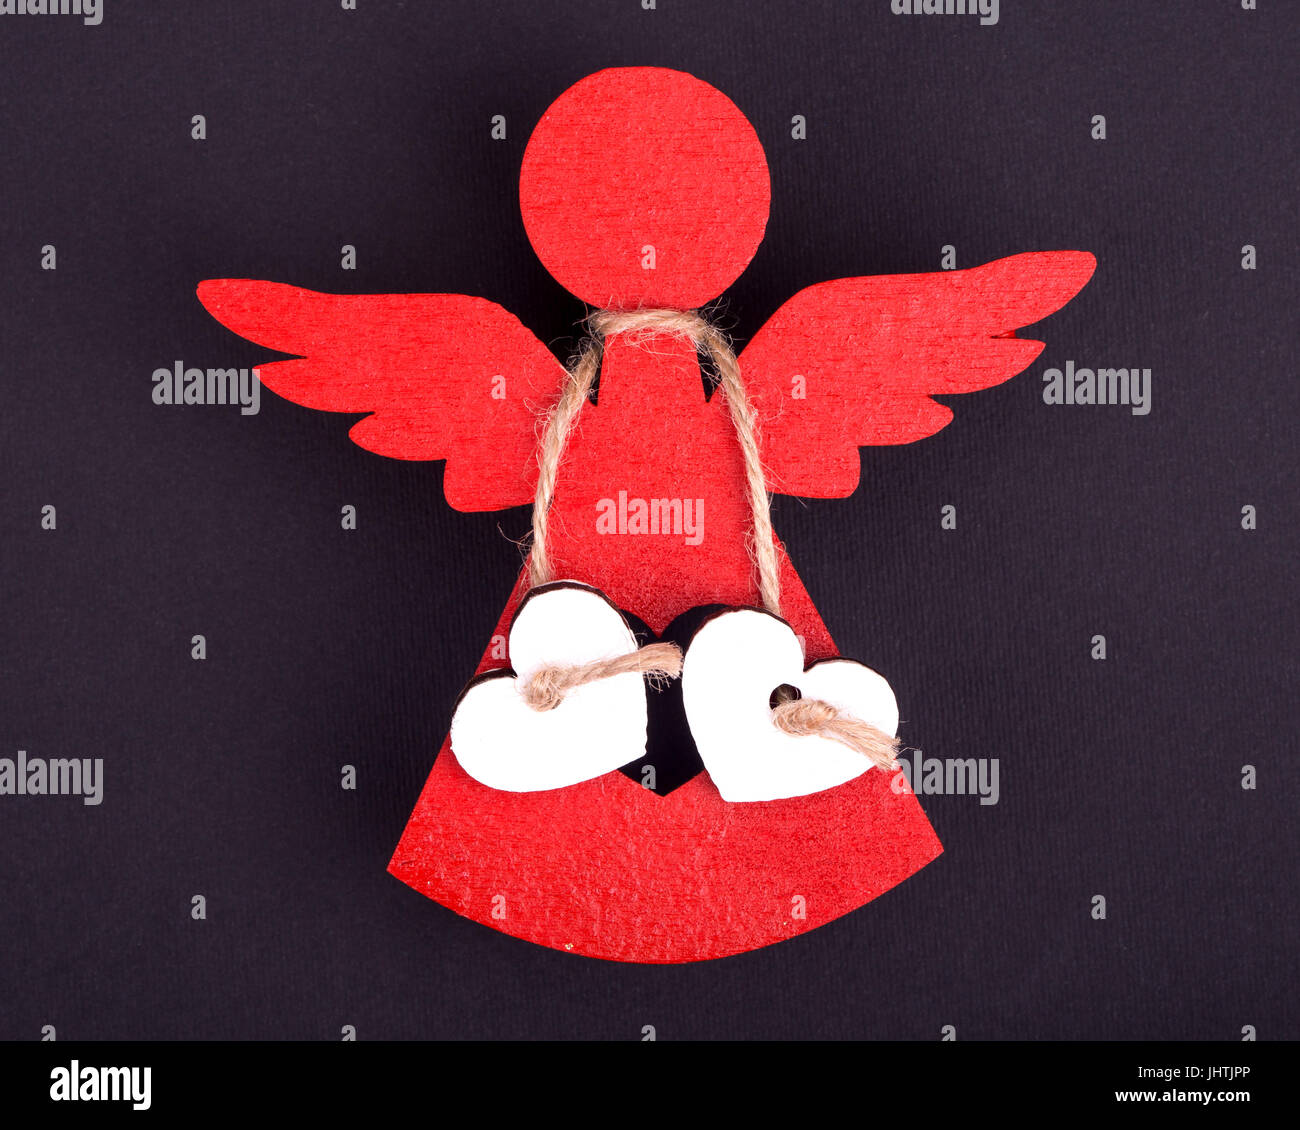 Christmas decorations of red angels two linked white hearts on a black background Stock Photo